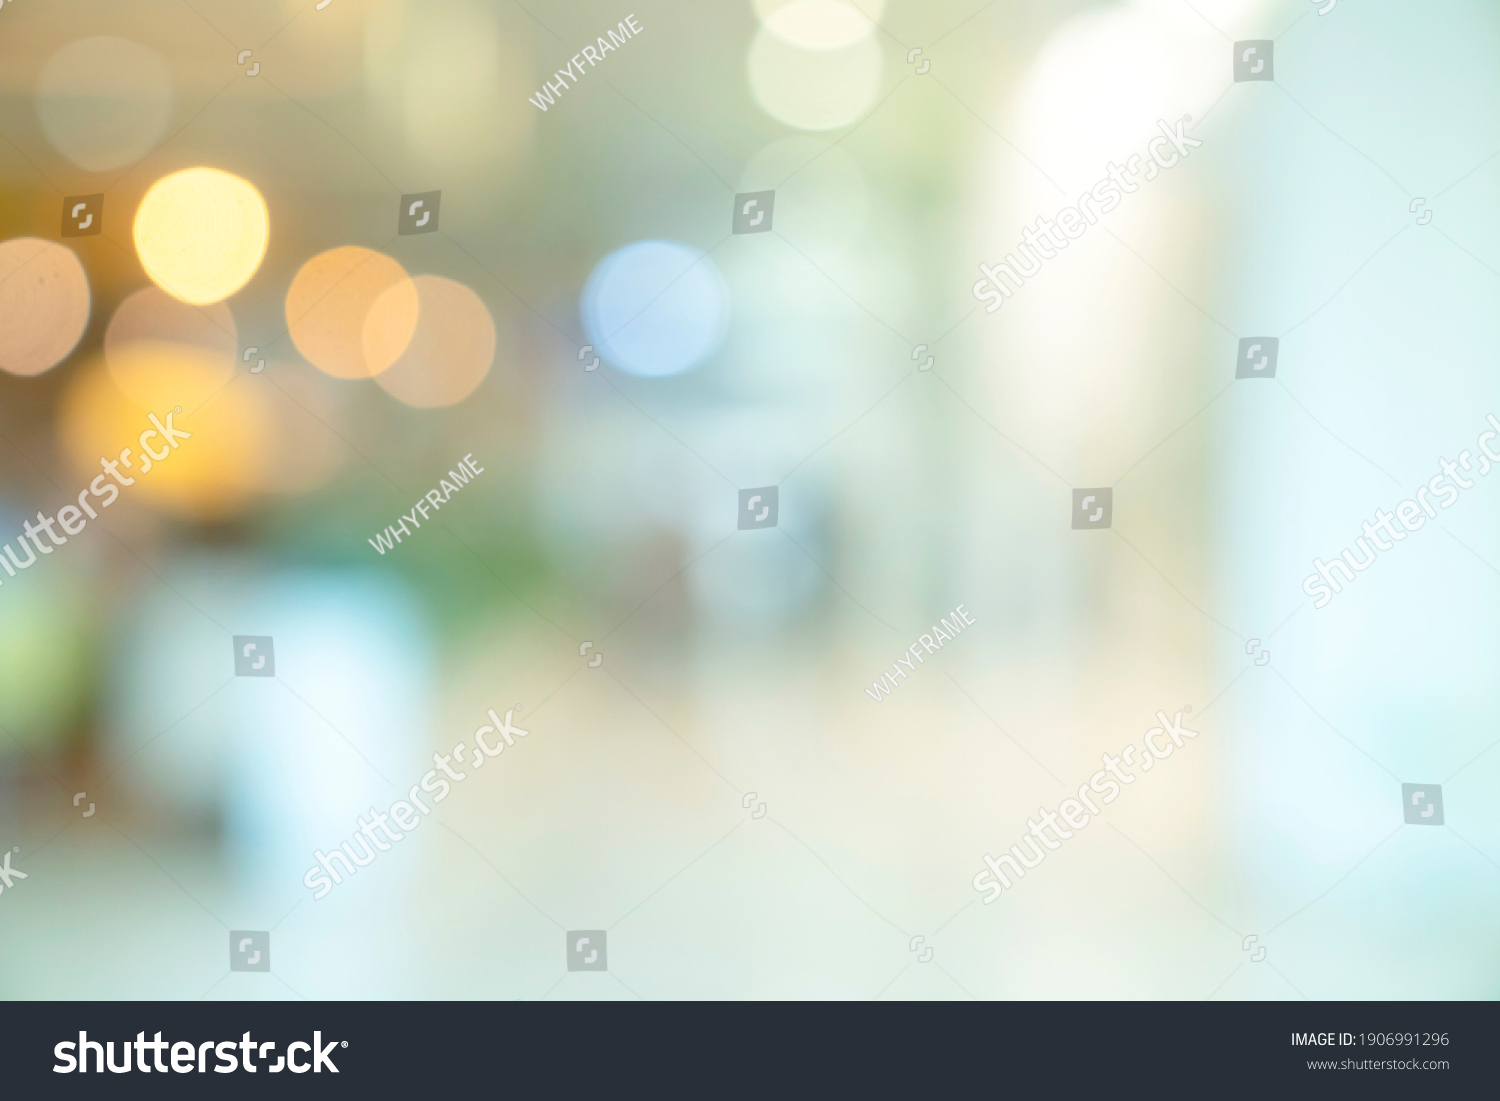 abstract blur image background of shopping mall with light bokeh and flare light bulb #1906991296